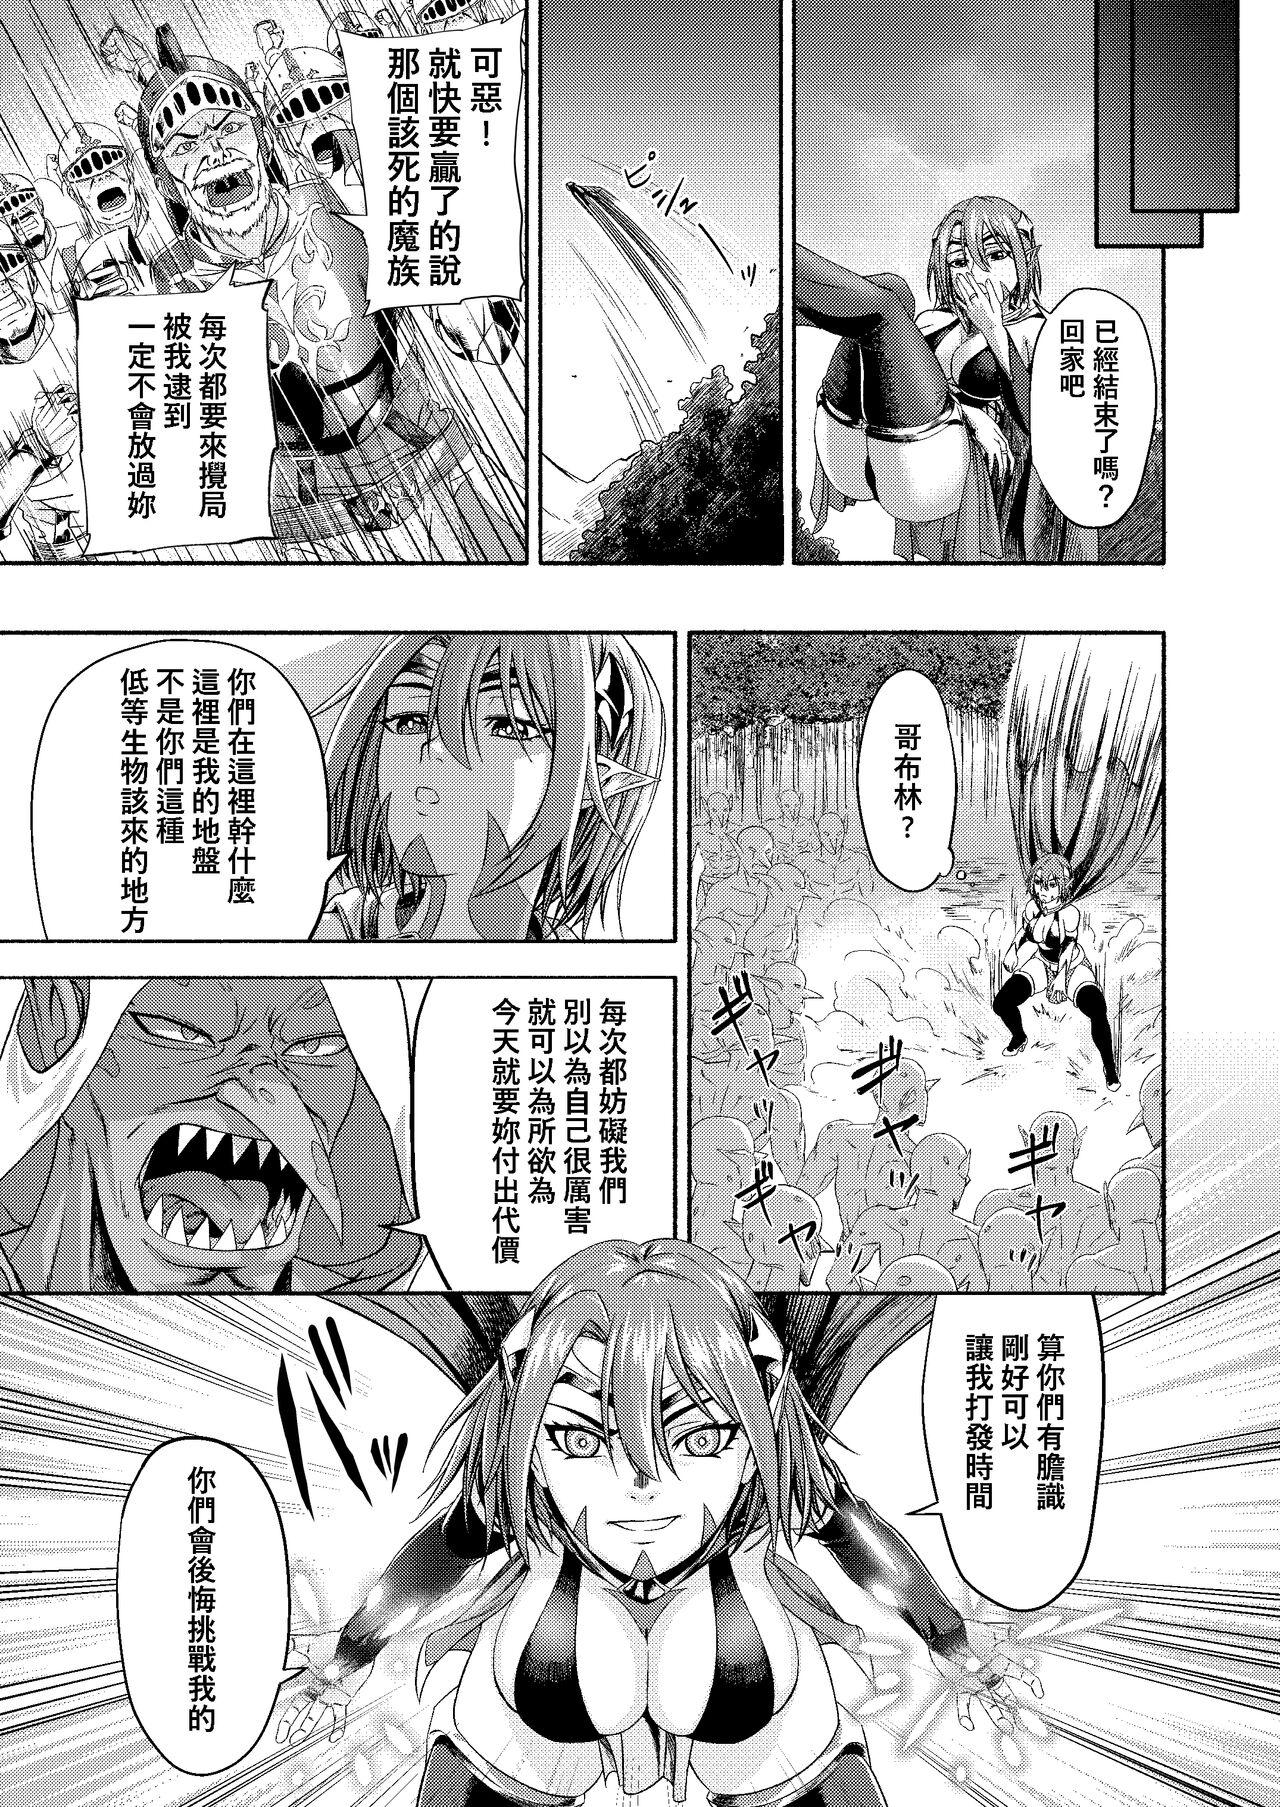 Camgirls Millennium Livestock-Candidate Demon King falls on Goblin Onaho Milf Cougar - Page 5